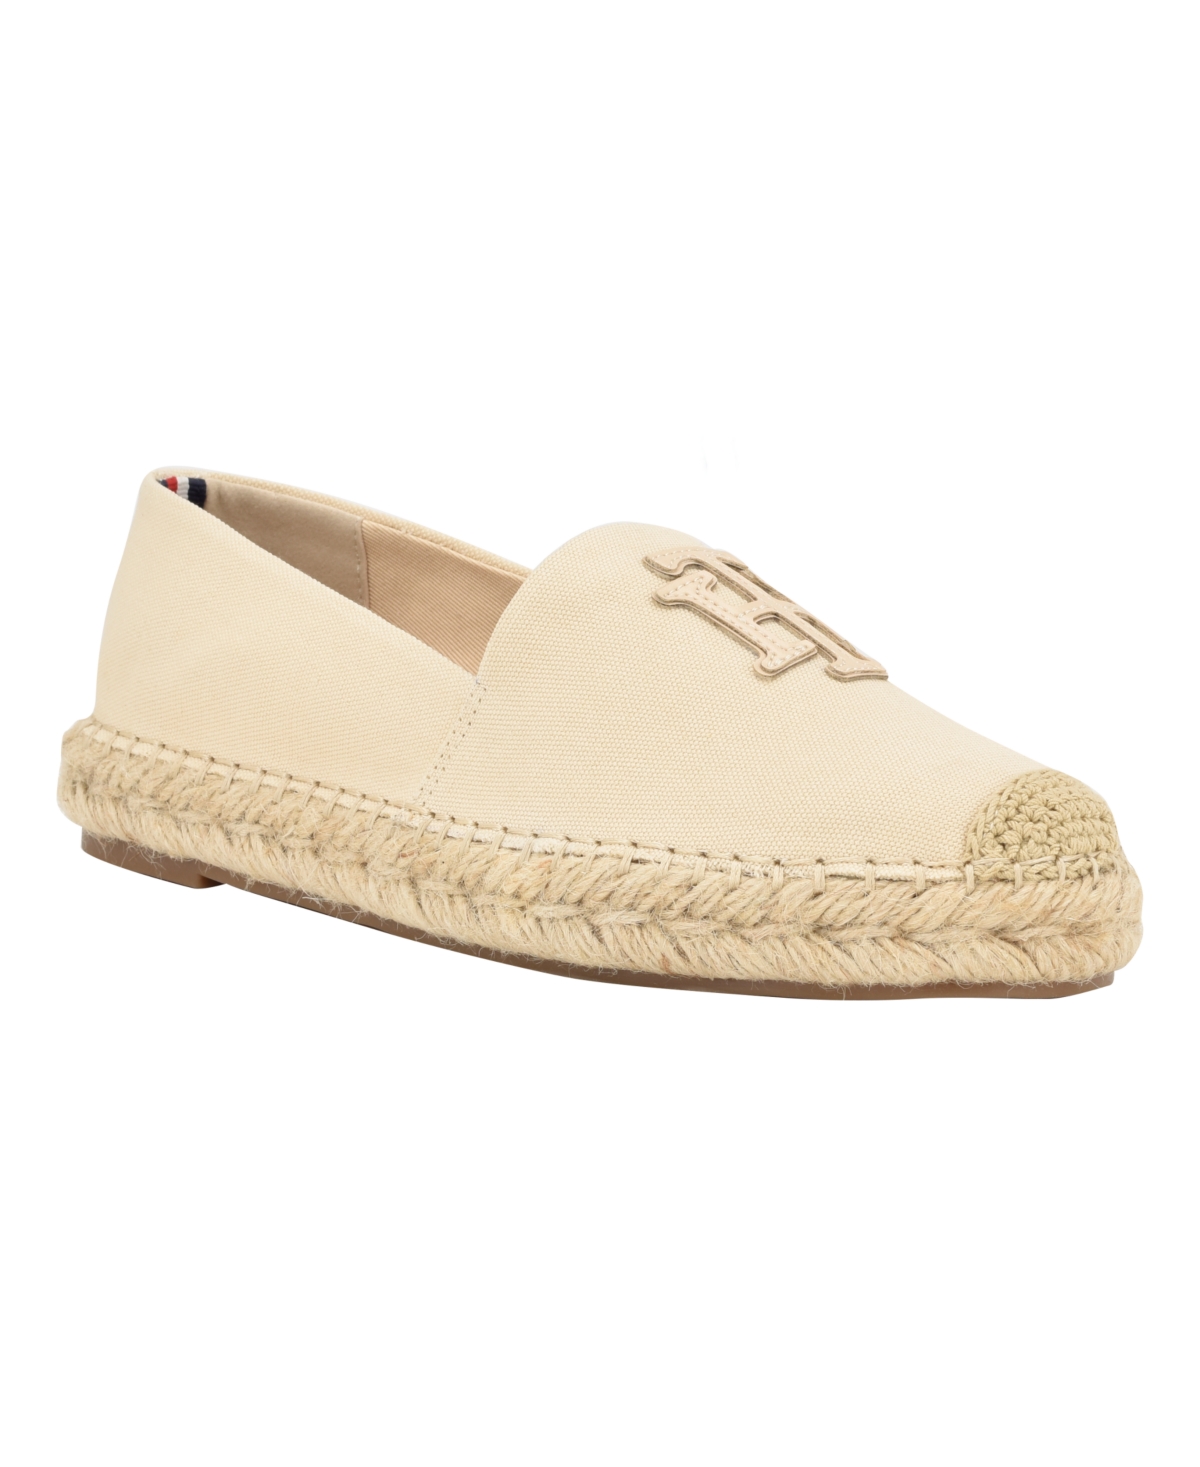 Shop Tommy Hilfiger Women's Peanni Flat Espadrille Closed Toe Shoes In Light Natural